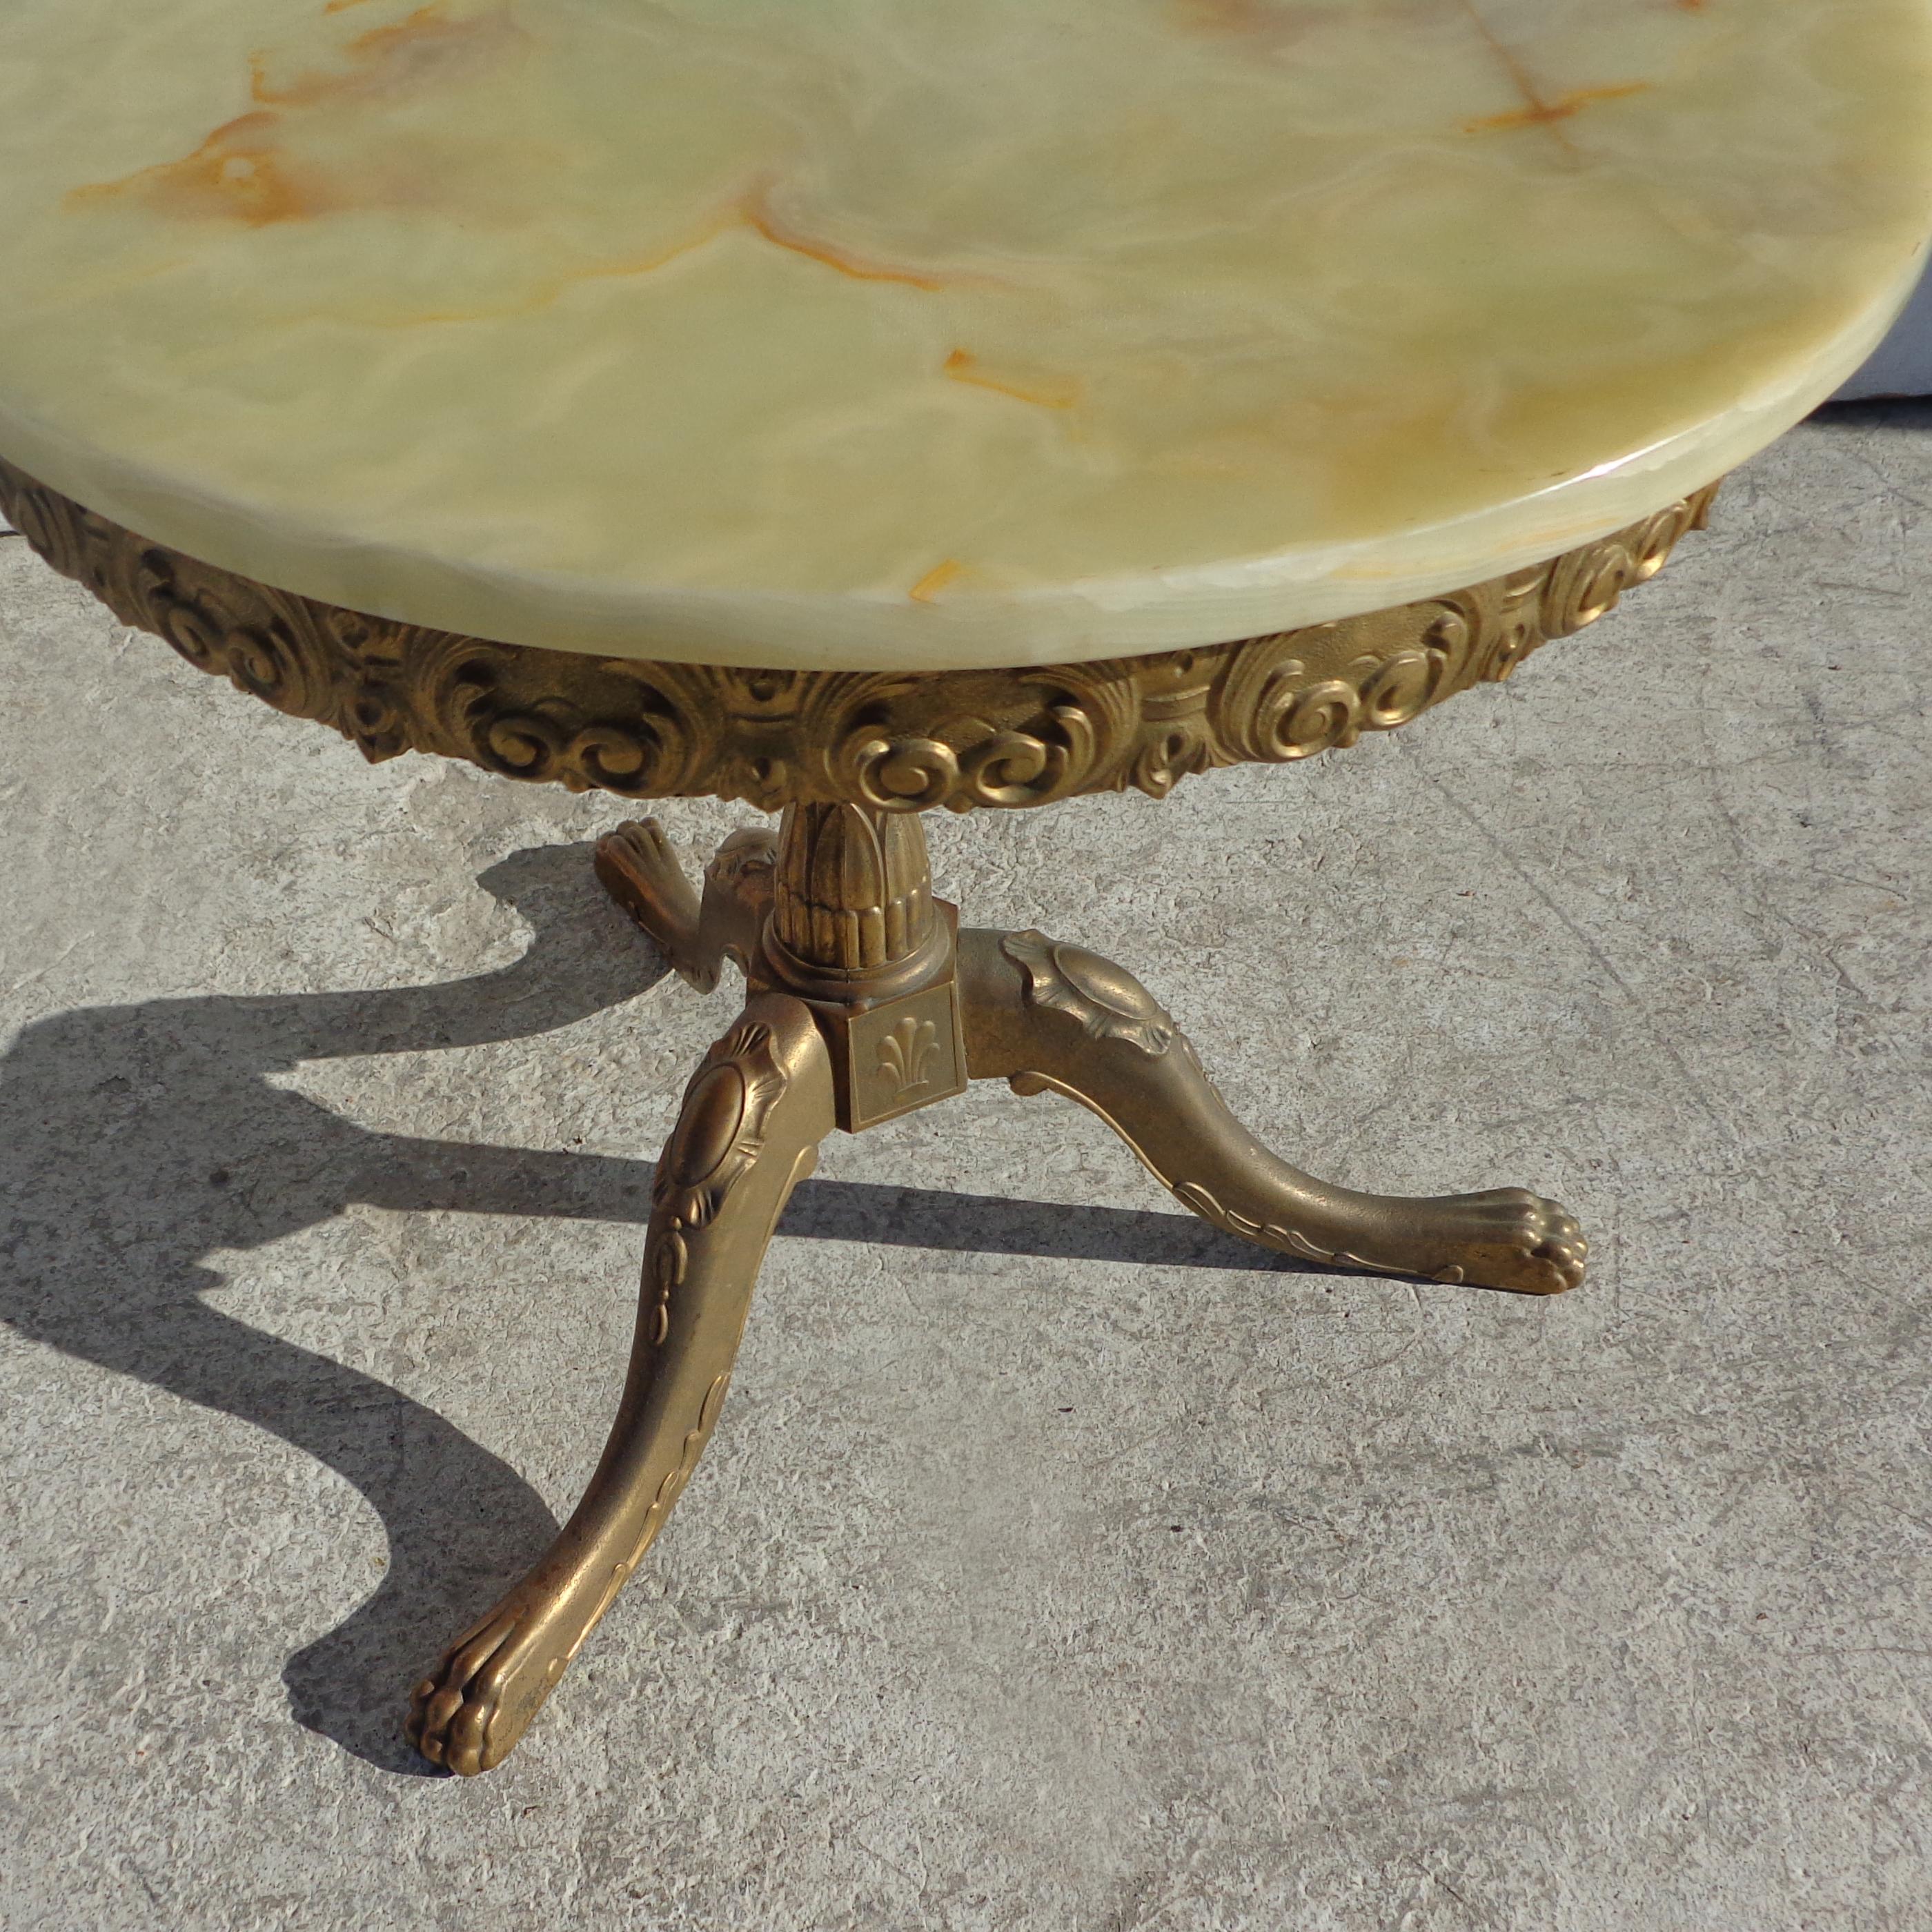 Neoclassical Revival Classical Revival French Onyx Side Table